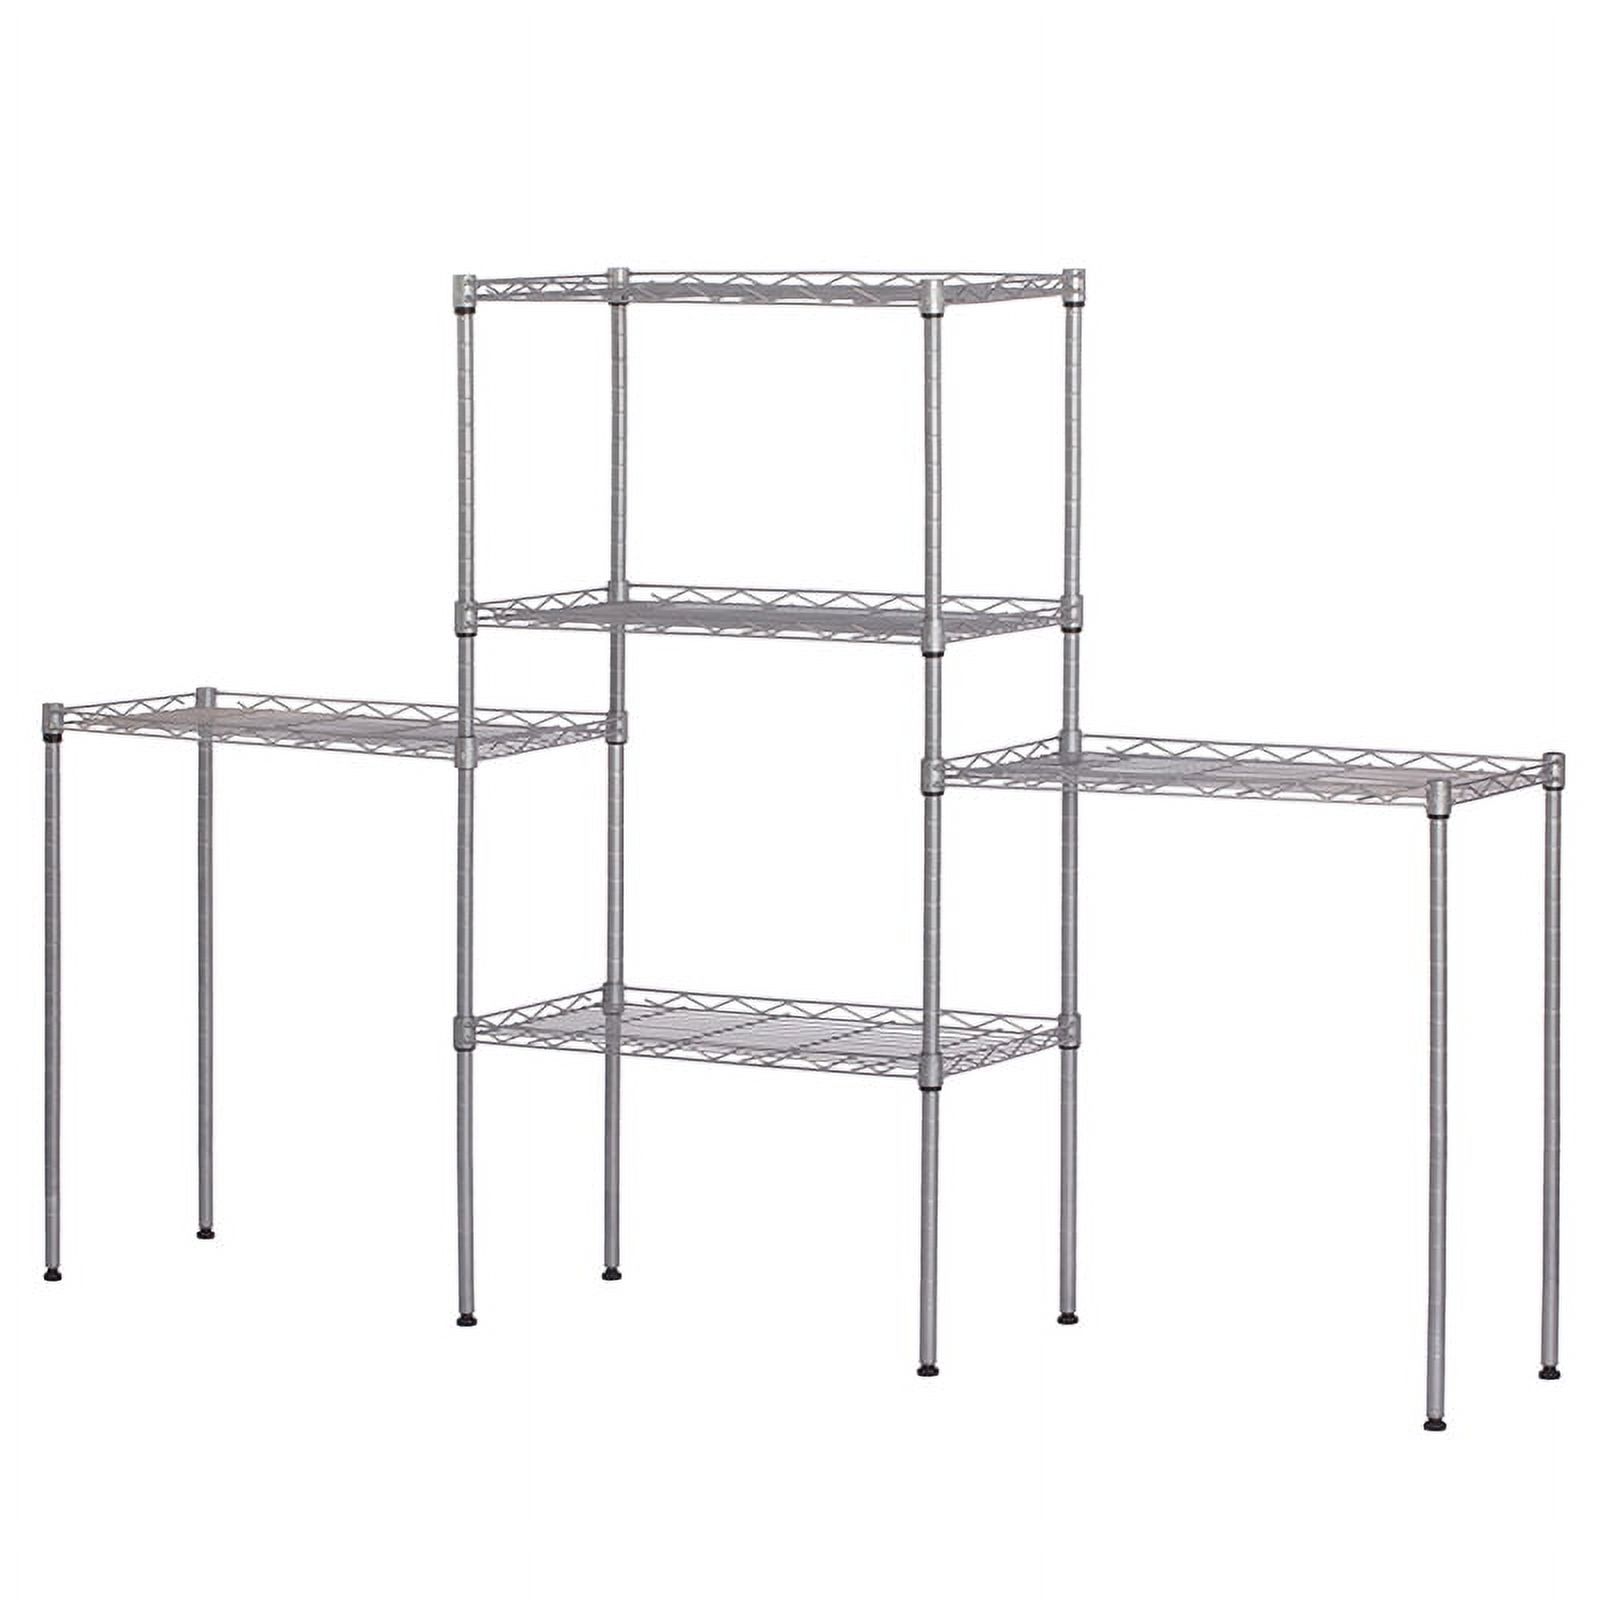 5 Tier Storage Shelves Wire Storage Shelves, Metal Shelves for Garage Metal Storage Shelving, Pantry Shelves Kitchen Rack Shelving Units and Storage, 21.25" x 11.42" x 59.06", Silver, S10146 - image 3 of 7